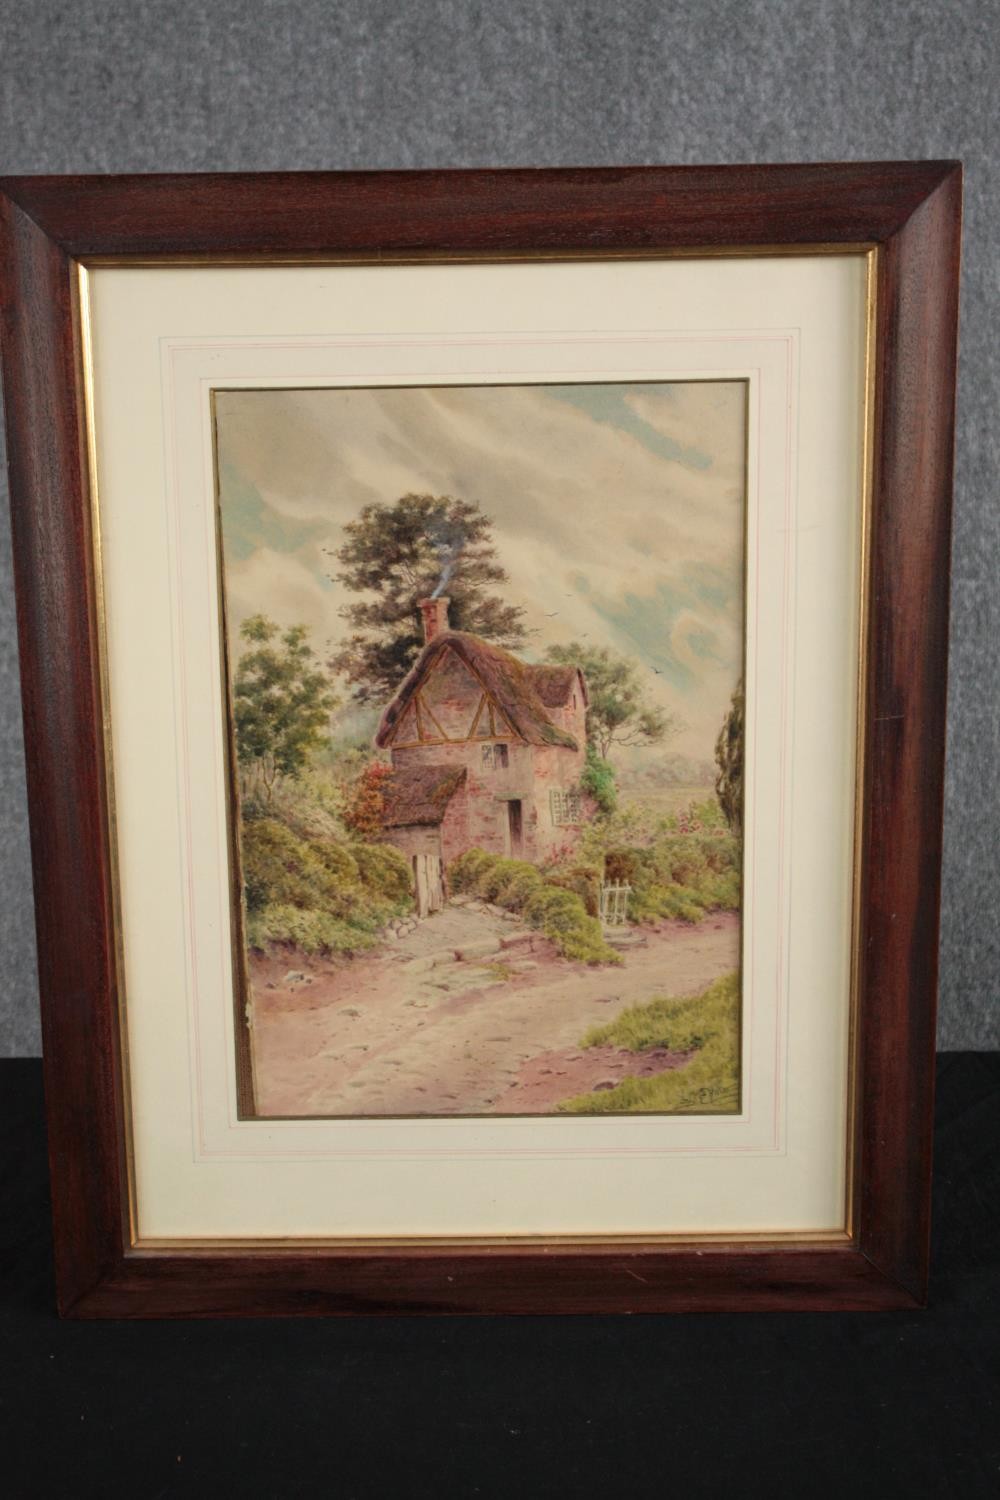 S.E. Hall, Watercolour painting. A rural cottage scene. Signed lower right. Framed and glazed. H. - Image 2 of 4